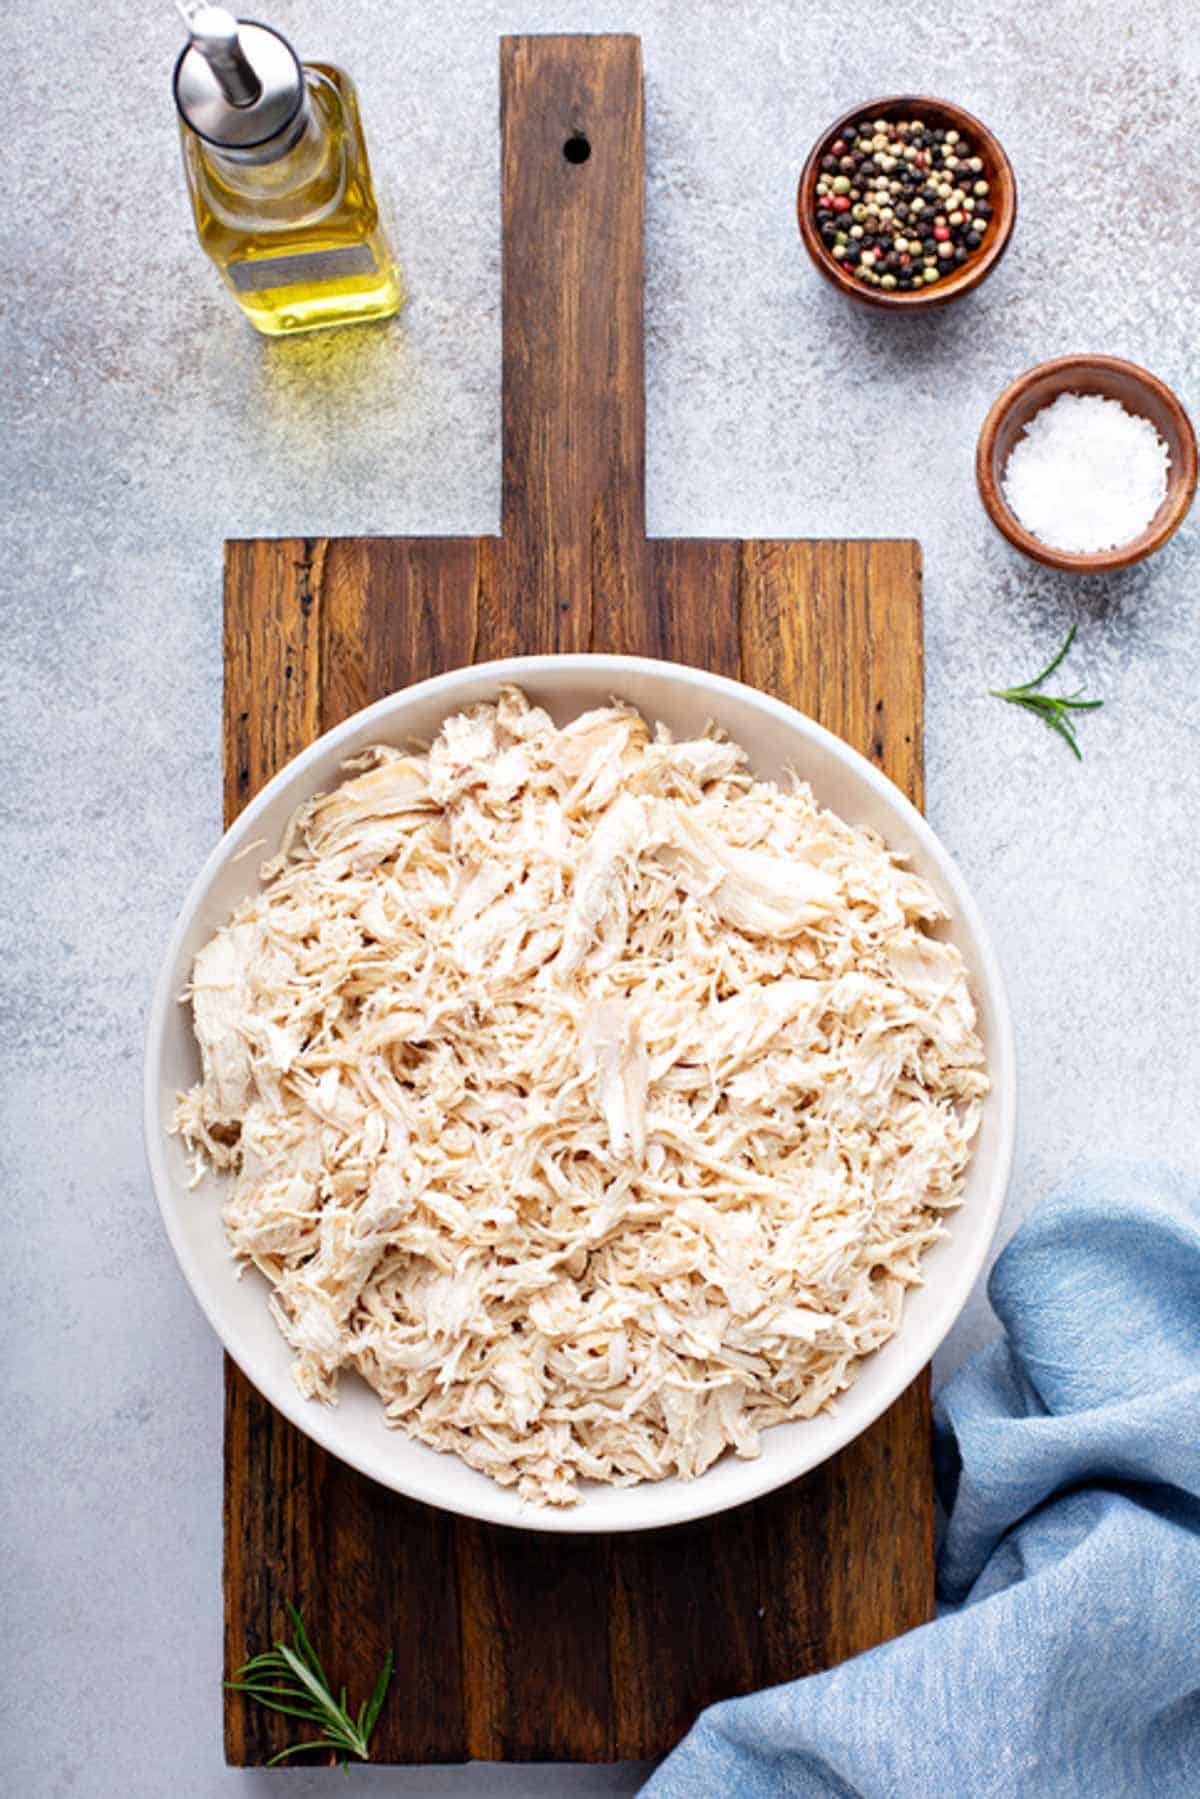 Shredded chicken meat in a big bowl